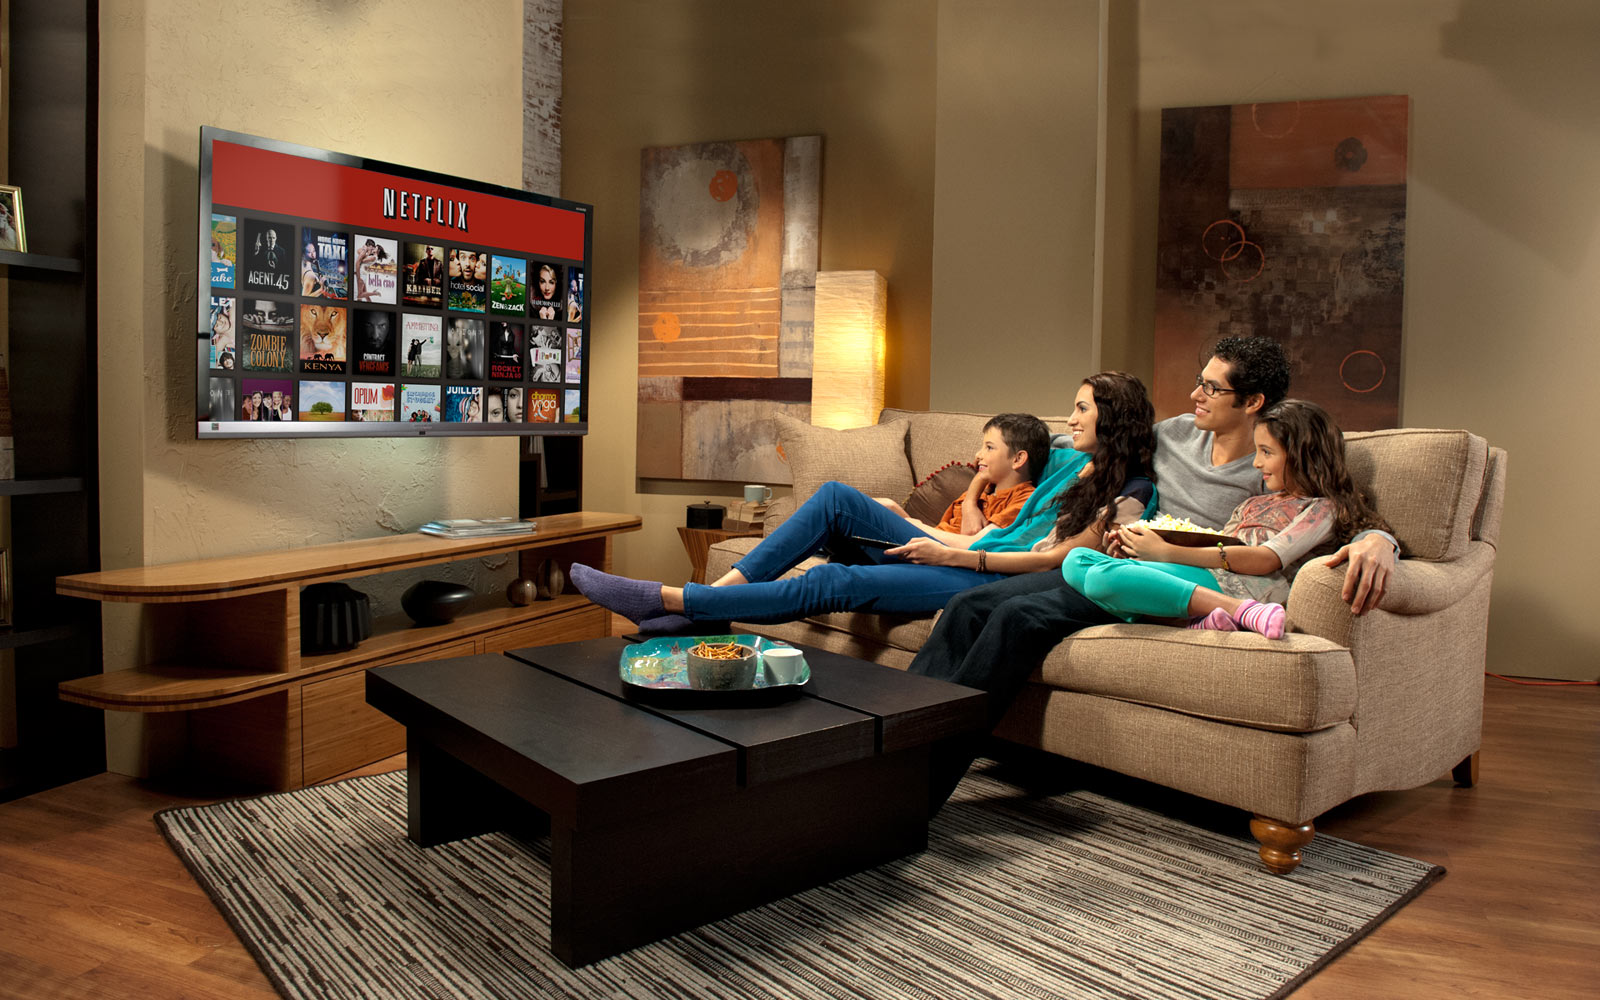 Most Americans Prefer Streaming Their Favorite Shows Online Over Watching o...